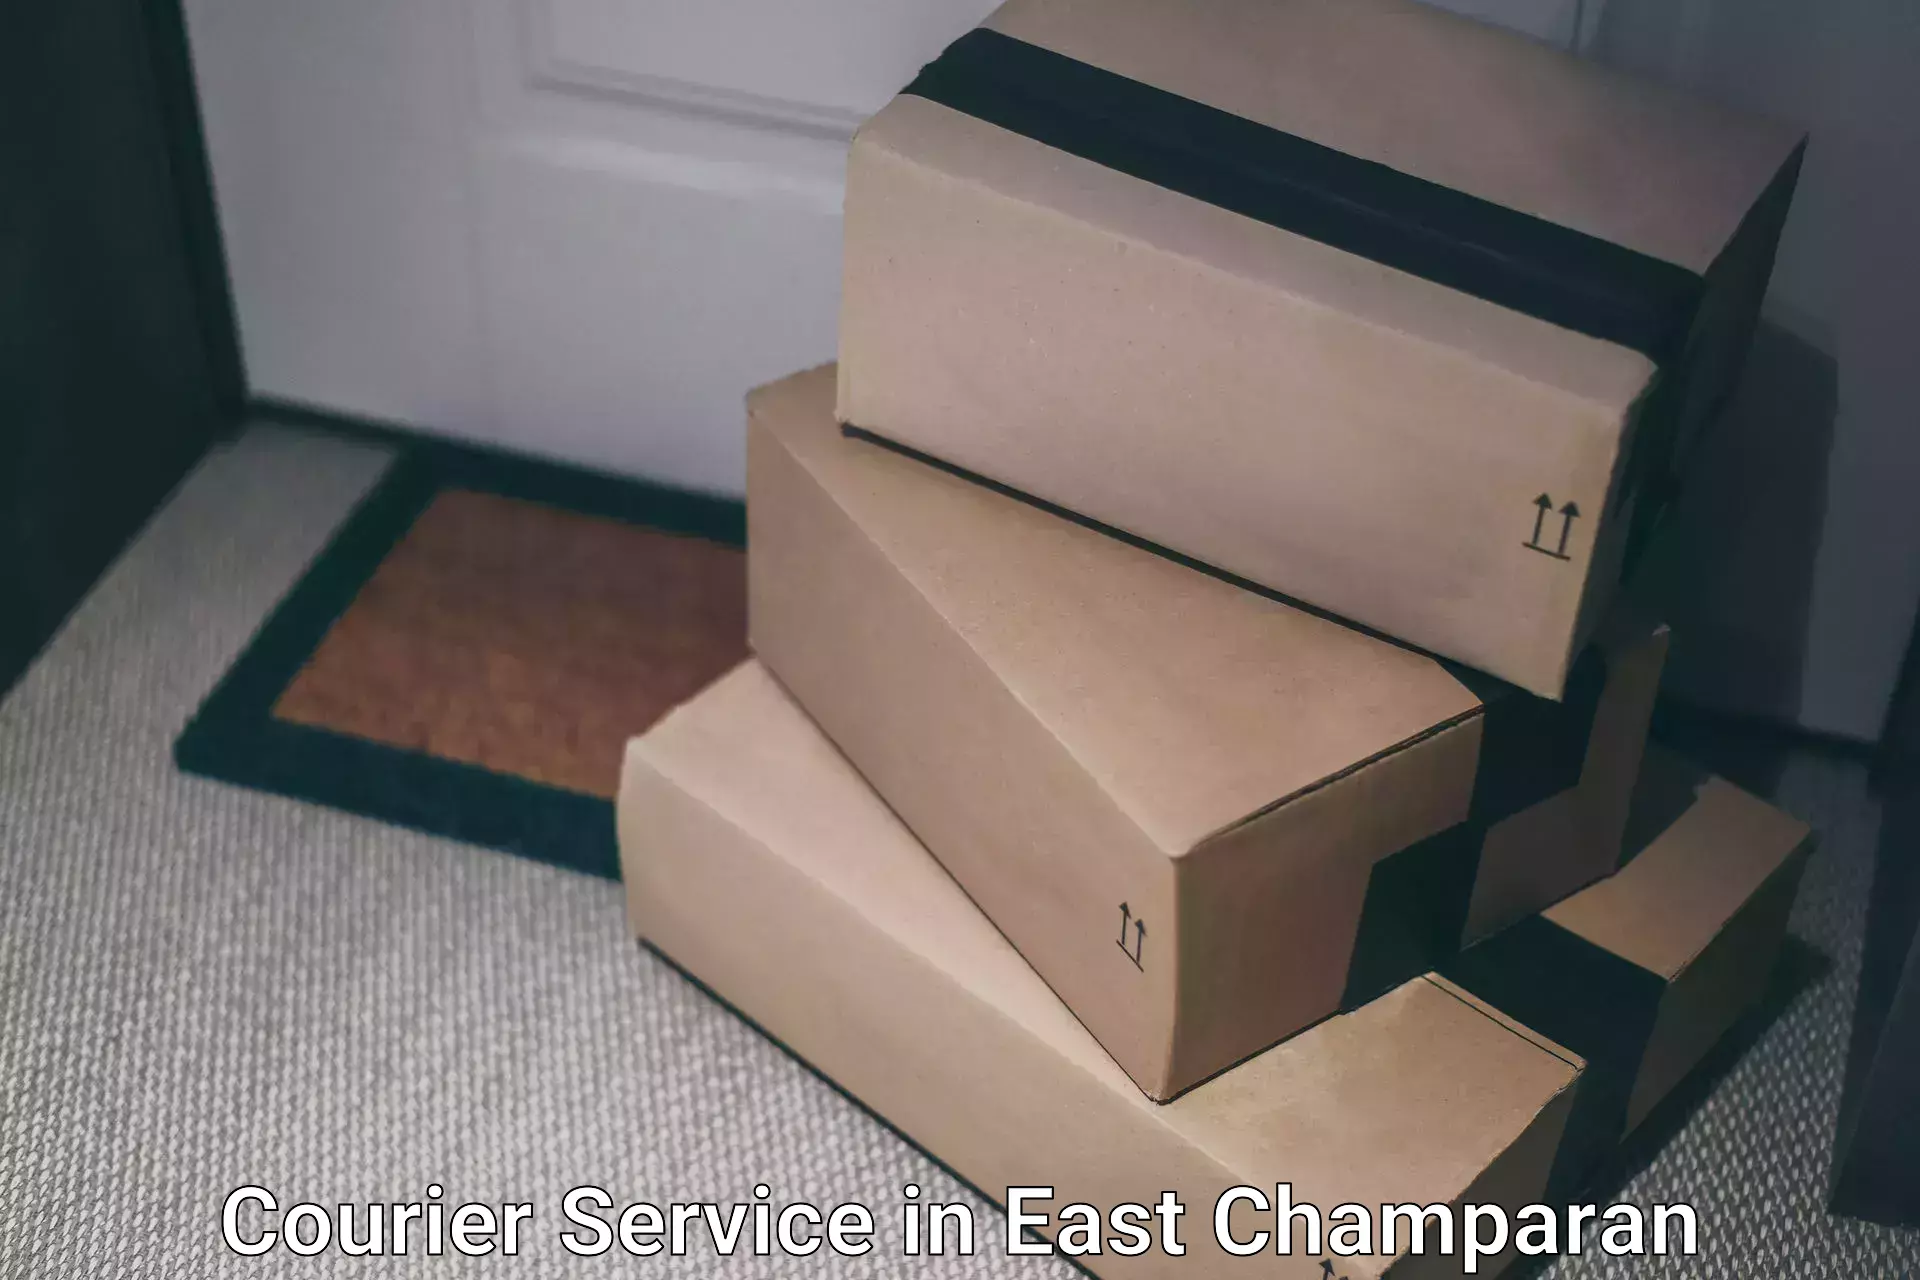 Easy return solutions in East Champaran